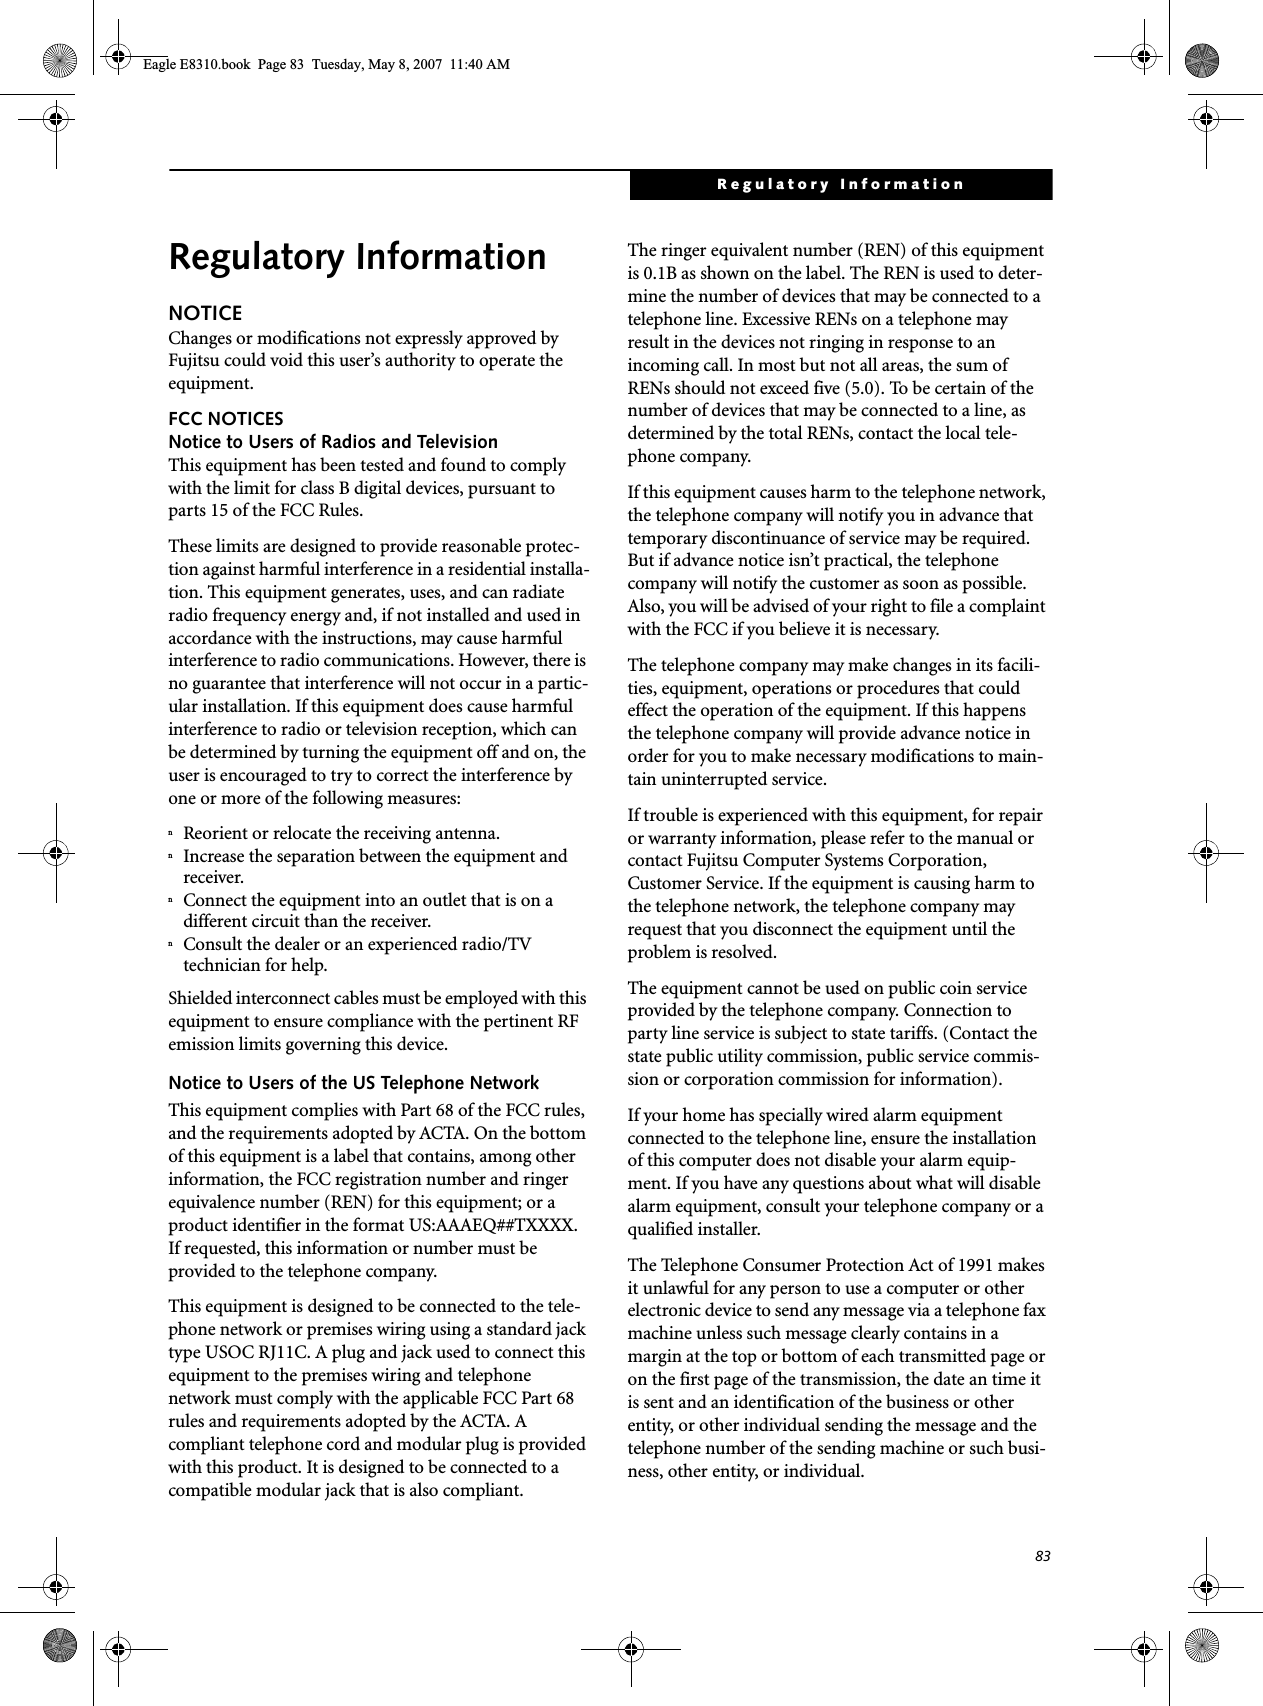 83Regulatory InformationRegulatory InformationNOTICEChanges or modifications not expressly approved by Fujitsu could void this user’s authority to operate the equipment.FCC NOTICESNotice to Users of Radios and TelevisionThis equipment has been tested and found to comply with the limit for class B digital devices, pursuant to parts 15 of the FCC Rules.These limits are designed to provide reasonable protec-tion against harmful interference in a residential installa-tion. This equipment generates, uses, and can radiate radio frequency energy and, if not installed and used in accordance with the instructions, may cause harmful interference to radio communications. However, there is no guarantee that interference will not occur in a partic-ular installation. If this equipment does cause harmful interference to radio or television reception, which can be determined by turning the equipment off and on, the user is encouraged to try to correct the interference by one or more of the following measures:nReorient or relocate the receiving antenna.nIncrease the separation between the equipment and receiver.nConnect the equipment into an outlet that is on a different circuit than the receiver.nConsult the dealer or an experienced radio/TVtechnician for help.Shielded interconnect cables must be employed with this equipment to ensure compliance with the pertinent RF emission limits governing this device. Notice to Users of the US Telephone NetworkThis equipment complies with Part 68 of the FCC rules, and the requirements adopted by ACTA. On the bottom of this equipment is a label that contains, among other information, the FCC registration number and ringer equivalence number (REN) for this equipment; or a product identifier in the format US:AAAEQ##TXXXX. If requested, this information or number must be provided to the telephone company.This equipment is designed to be connected to the tele-phone network or premises wiring using a standard jack type USOC RJ11C. A plug and jack used to connect this equipment to the premises wiring and telephone network must comply with the applicable FCC Part 68 rules and requirements adopted by the ACTA. A compliant telephone cord and modular plug is provided with this product. It is designed to be connected to a compatible modular jack that is also compliant.The ringer equivalent number (REN) of this equipment is 0.1B as shown on the label. The REN is used to deter-mine the number of devices that may be connected to a telephone line. Excessive RENs on a telephone may result in the devices not ringing in response to an incoming call. In most but not all areas, the sum of RENs should not exceed five (5.0). To be certain of the number of devices that may be connected to a line, as determined by the total RENs, contact the local tele-phone company. If this equipment causes harm to the telephone network, the telephone company will notify you in advance that temporary discontinuance of service may be required. But if advance notice isn’t practical, the telephone company will notify the customer as soon as possible. Also, you will be advised of your right to file a complaint with the FCC if you believe it is necessary.The telephone company may make changes in its facili-ties, equipment, operations or procedures that could effect the operation of the equipment. If this happens the telephone company will provide advance notice in order for you to make necessary modifications to main-tain uninterrupted service. If trouble is experienced with this equipment, for repair or warranty information, please refer to the manual or contact Fujitsu Computer Systems Corporation, Customer Service. If the equipment is causing harm to the telephone network, the telephone company may request that you disconnect the equipment until the problem is resolved.The equipment cannot be used on public coin service provided by the telephone company. Connection to party line service is subject to state tariffs. (Contact the state public utility commission, public service commis-sion or corporation commission for information). If your home has specially wired alarm equipment connected to the telephone line, ensure the installation of this computer does not disable your alarm equip-ment. If you have any questions about what will disable alarm equipment, consult your telephone company or a qualified installer.The Telephone Consumer Protection Act of 1991 makes it unlawful for any person to use a computer or other electronic device to send any message via a telephone fax machine unless such message clearly contains in a margin at the top or bottom of each transmitted page or on the first page of the transmission, the date an time it is sent and an identification of the business or other entity, or other individual sending the message and the telephone number of the sending machine or such busi-ness, other entity, or individual.Eagle E8310.book  Page 83  Tuesday, May 8, 2007  11:40 AM